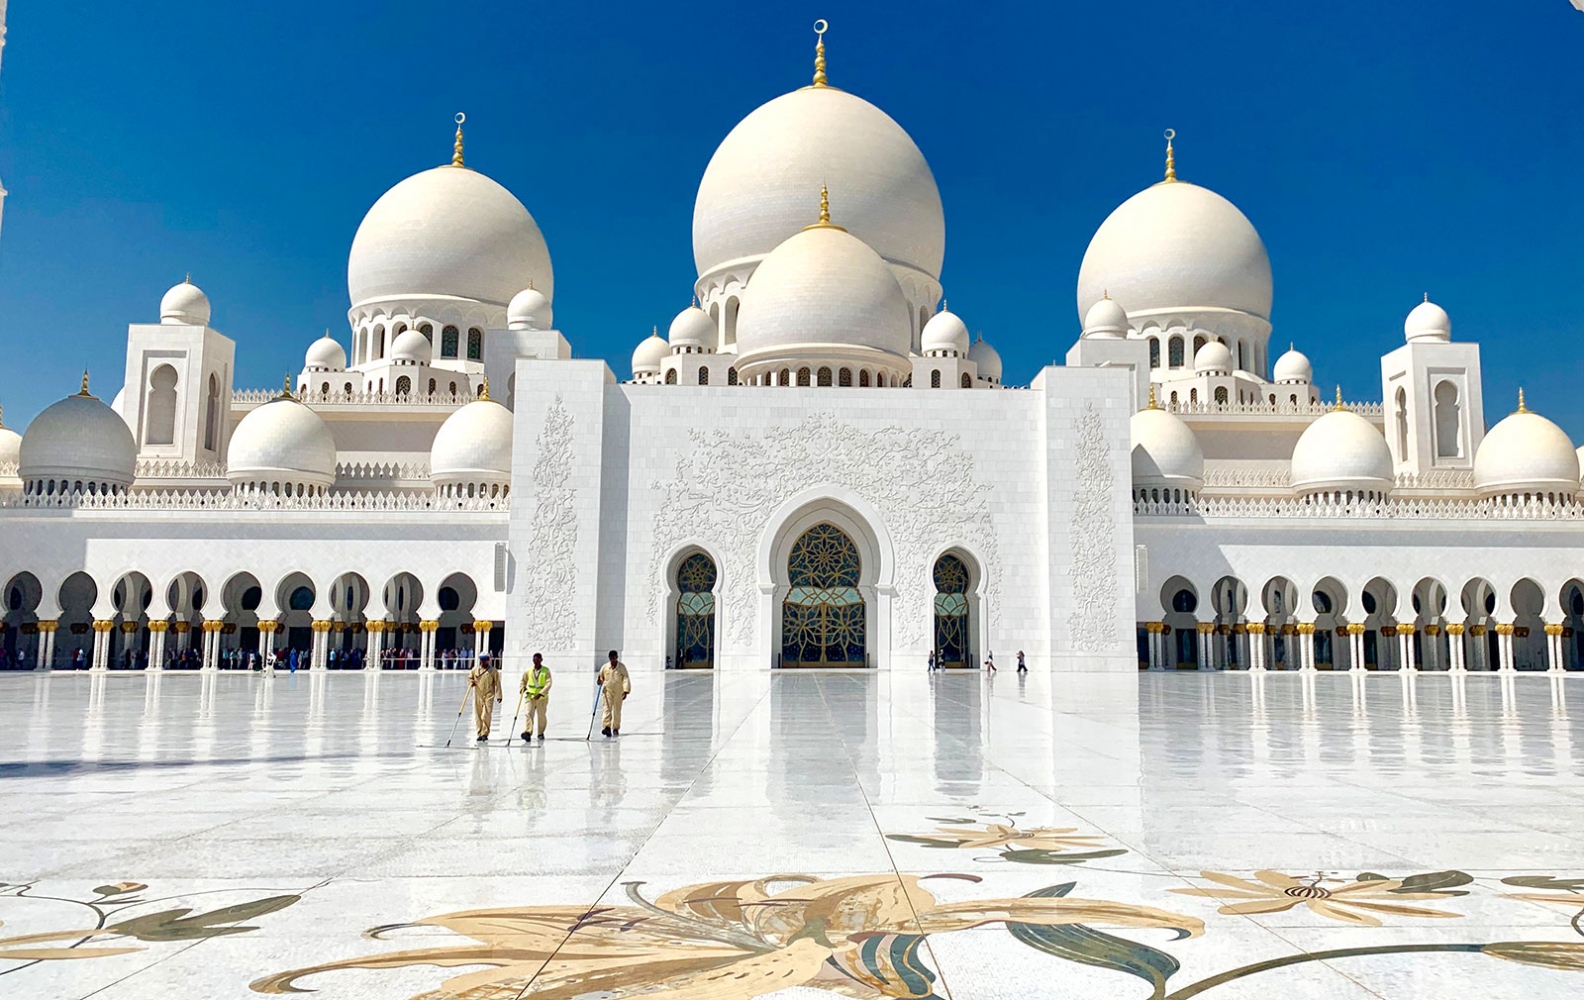 Architecture - The  Sheikh Zayed  Grand  Mosque  - Abu Dhabi